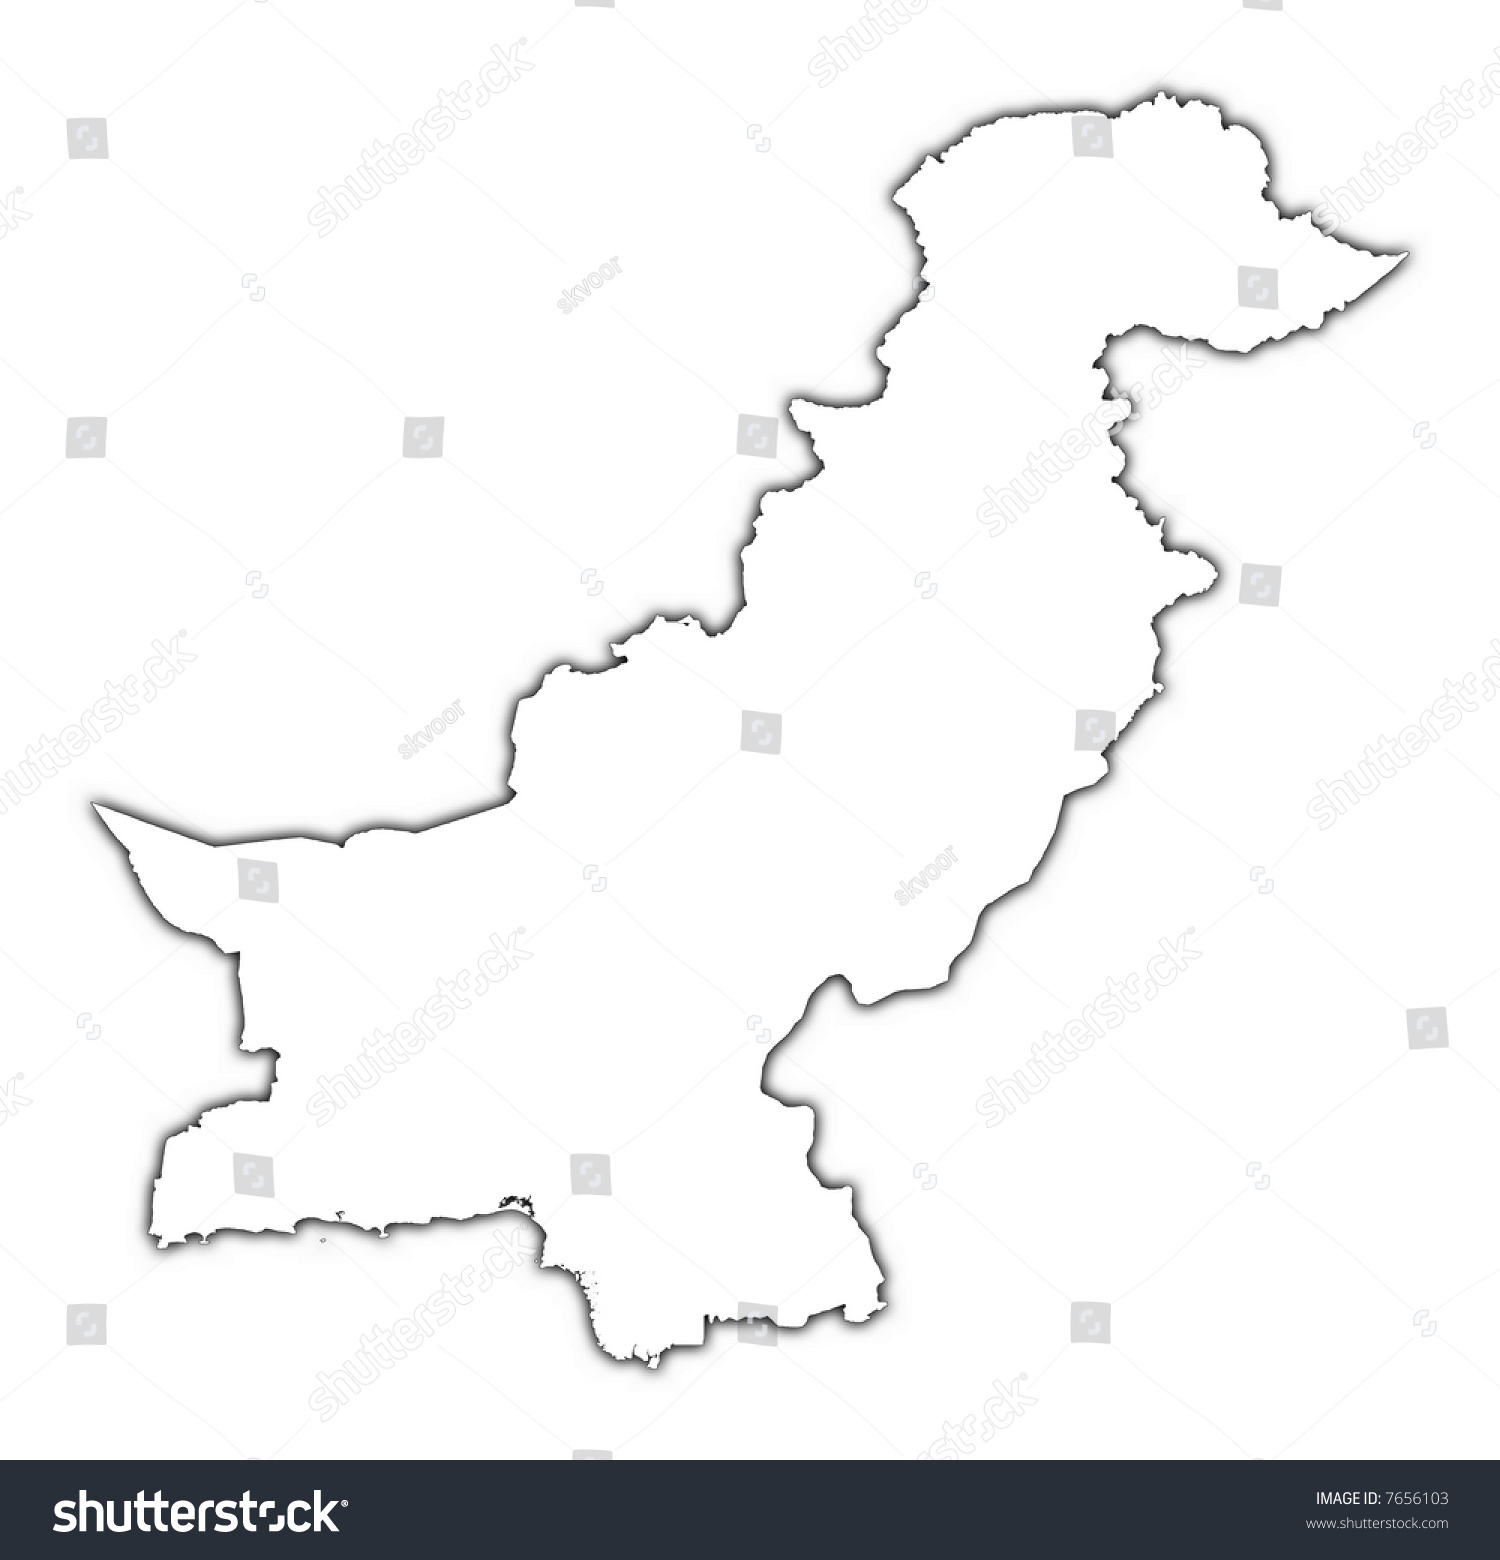 Pakistan Outline Map With Shadow. Detailed, Mercator Projection. Stock ...